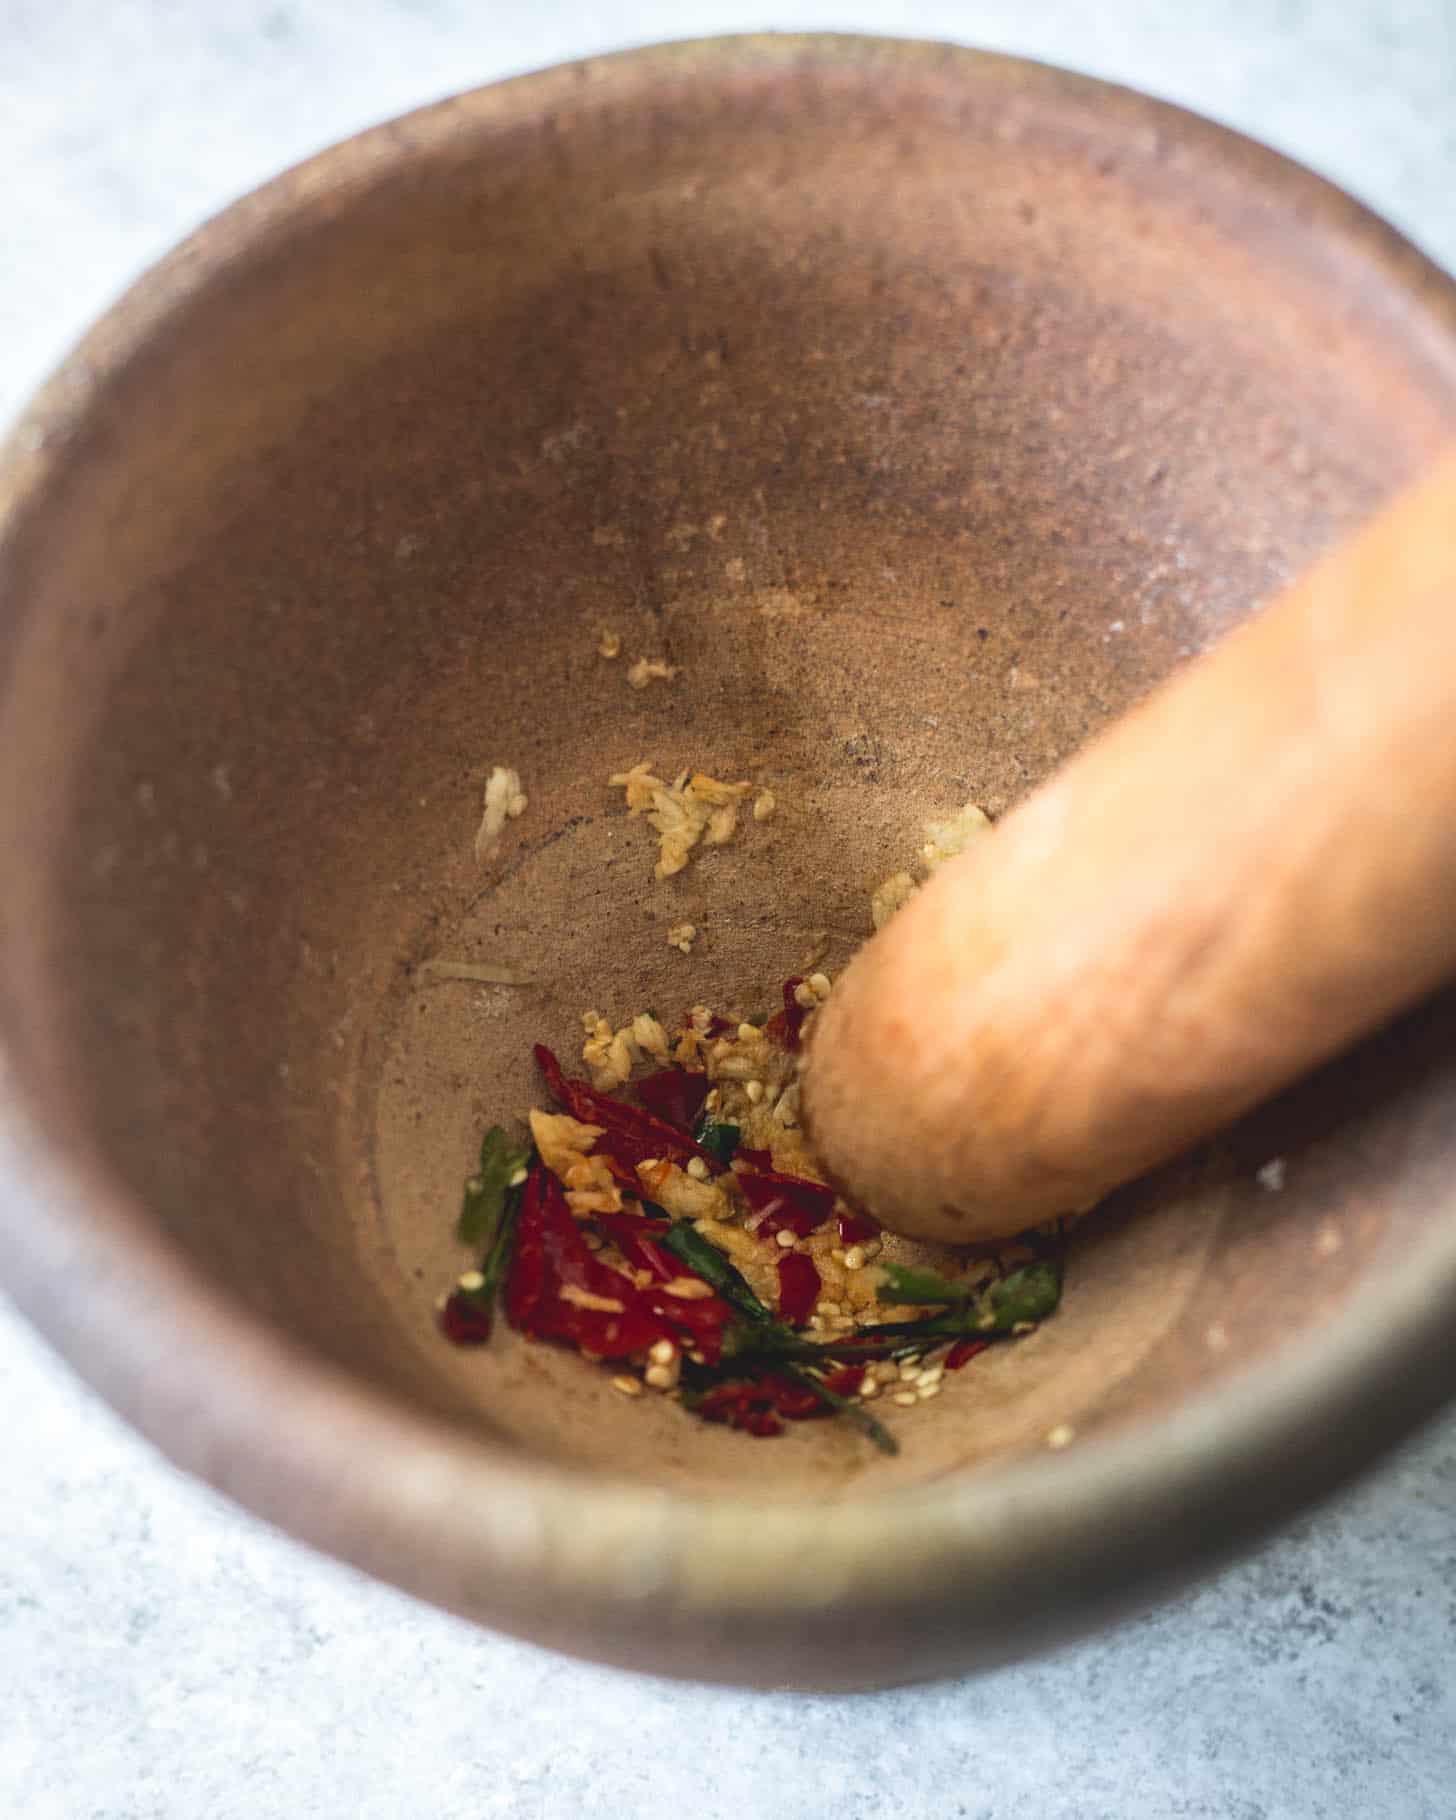 grinding Thai spices in mortar and pestle